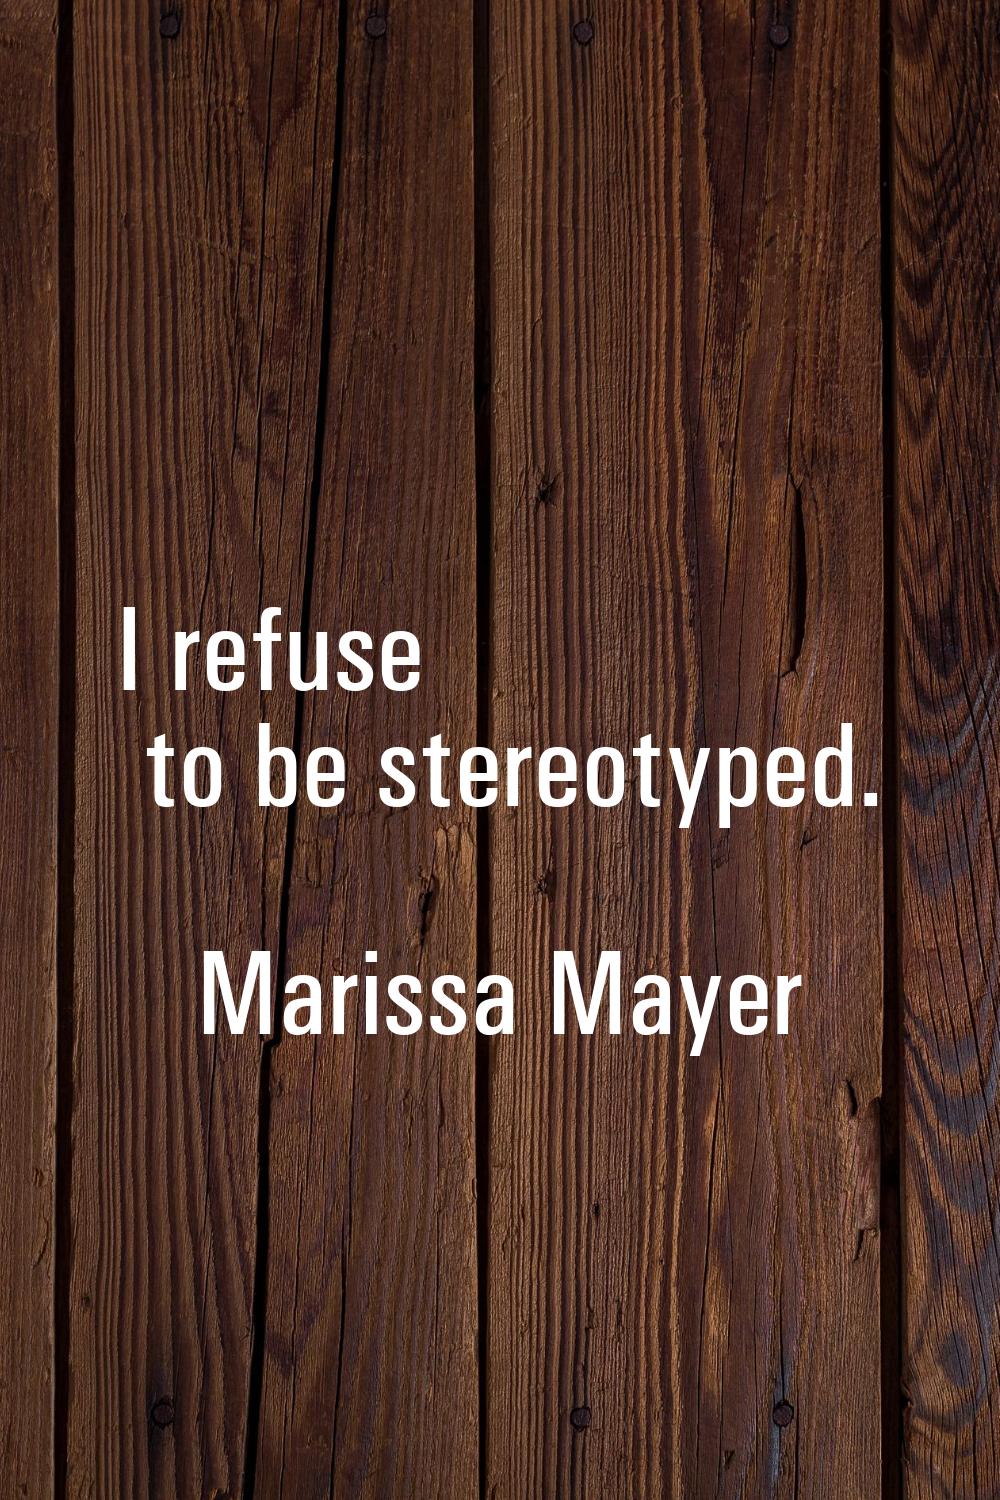 I refuse to be stereotyped.